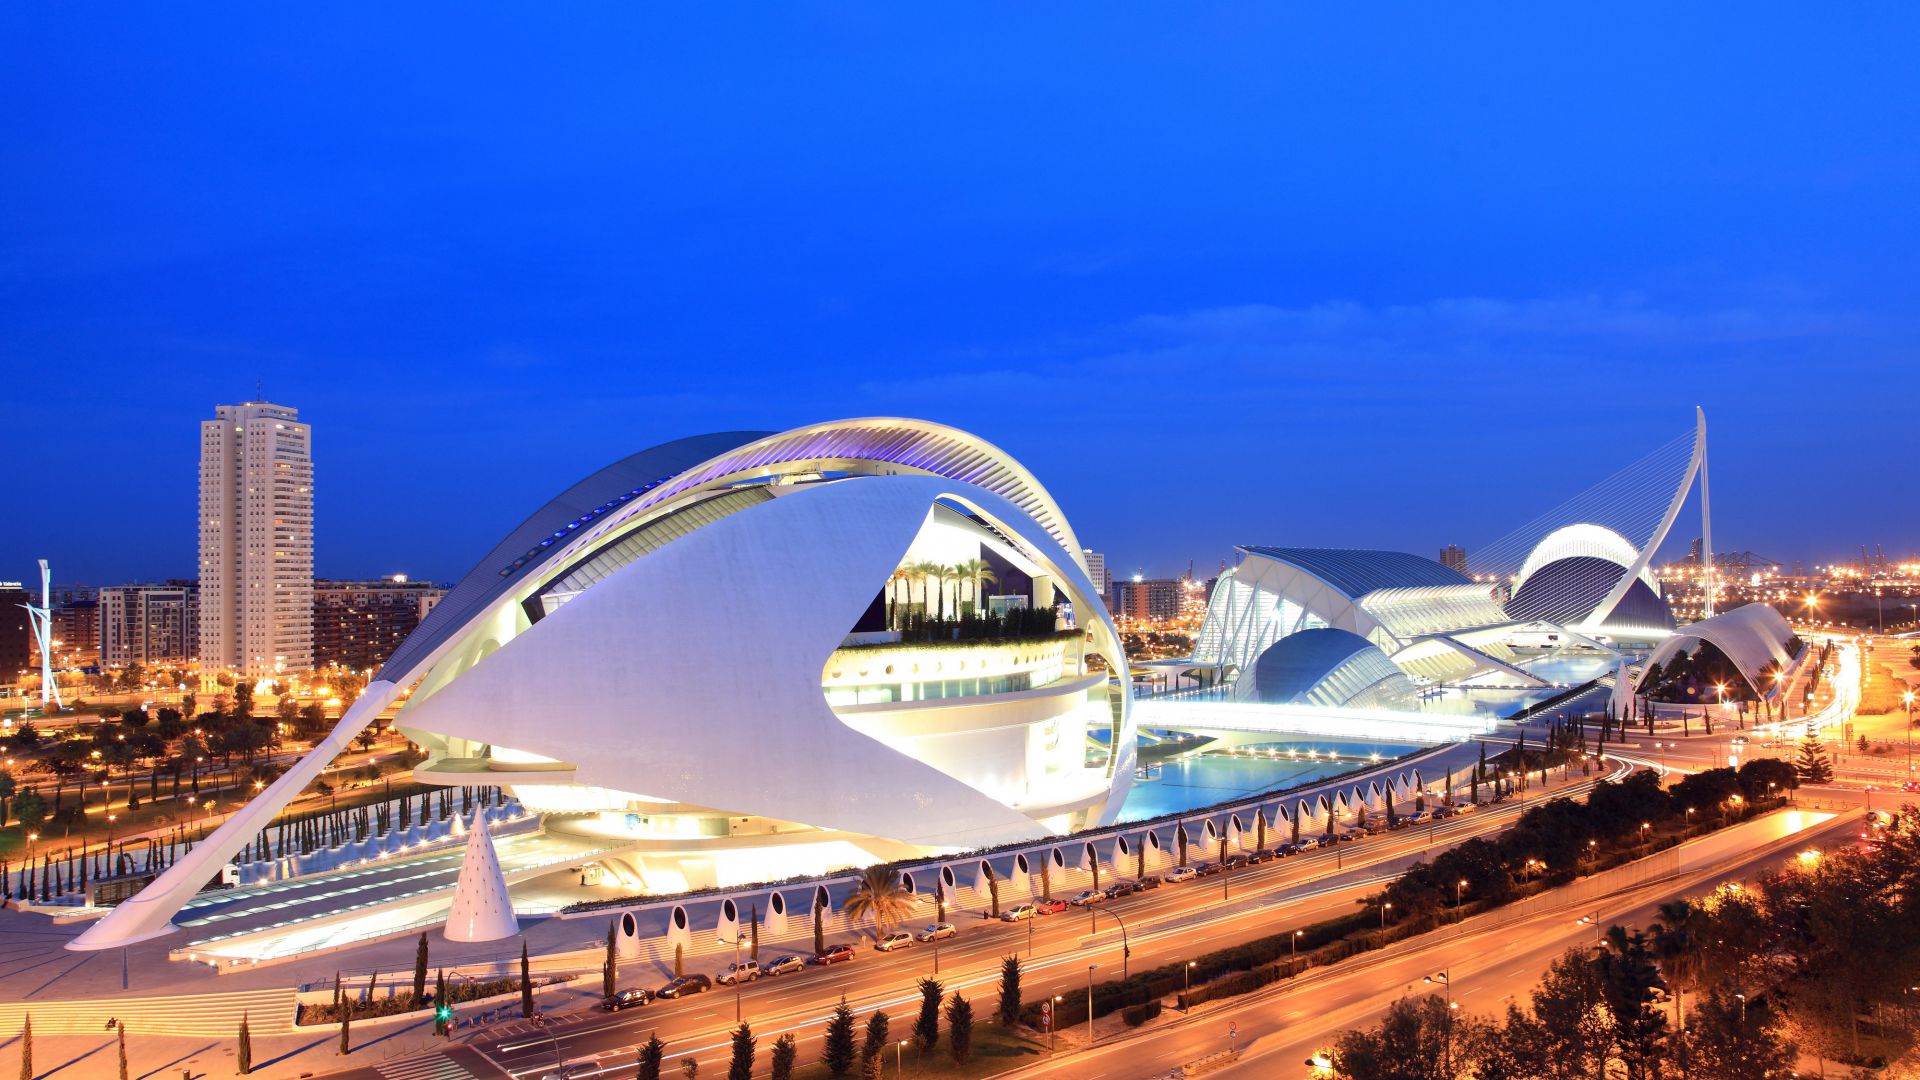 City of Arts and Sciences, Spain, Tourism, Travel (horizontal)